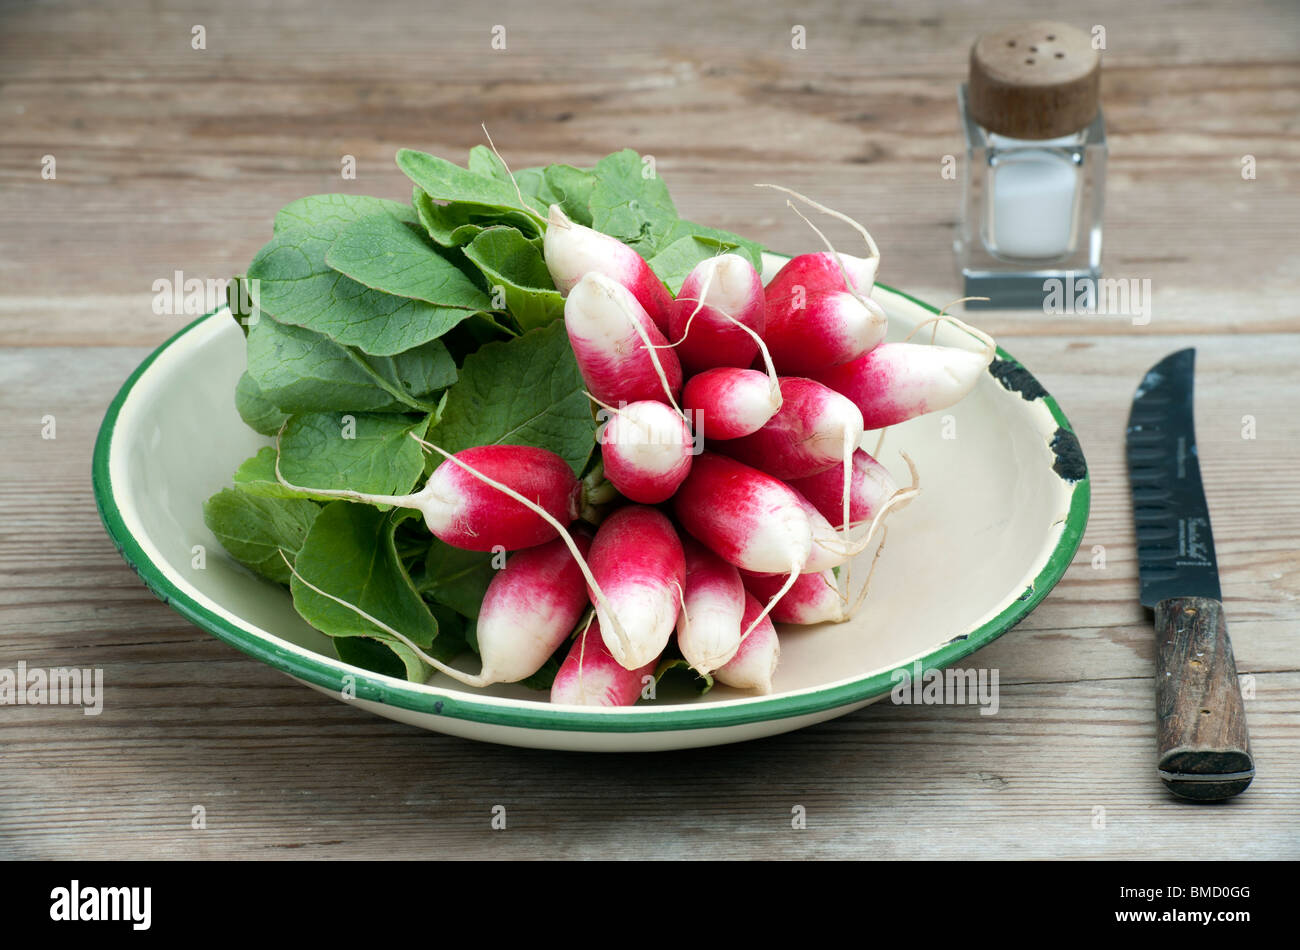 A Bunch Of Fresh French Breakfast Radish In A Enamel Dish, With A Knife and Salt Pot On A Wooden Kitchen Table Stock Photo